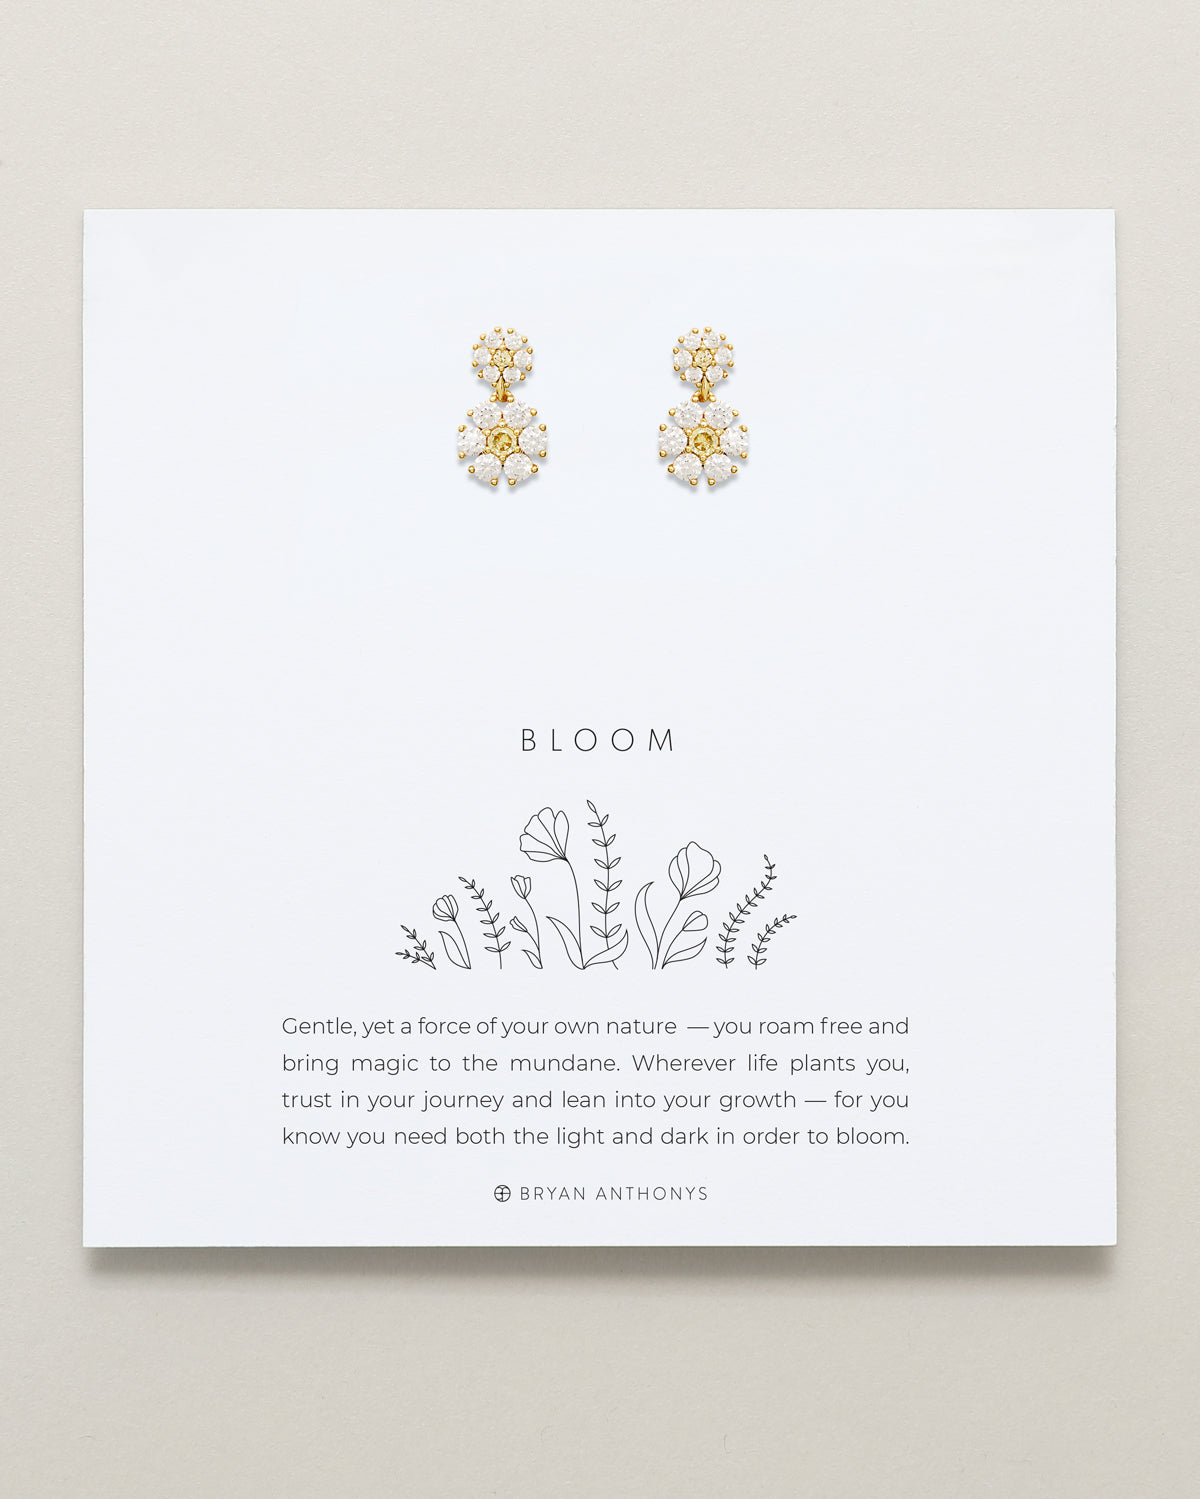 Bryan Anthonys Bloom Gold Drop Earrings On Card